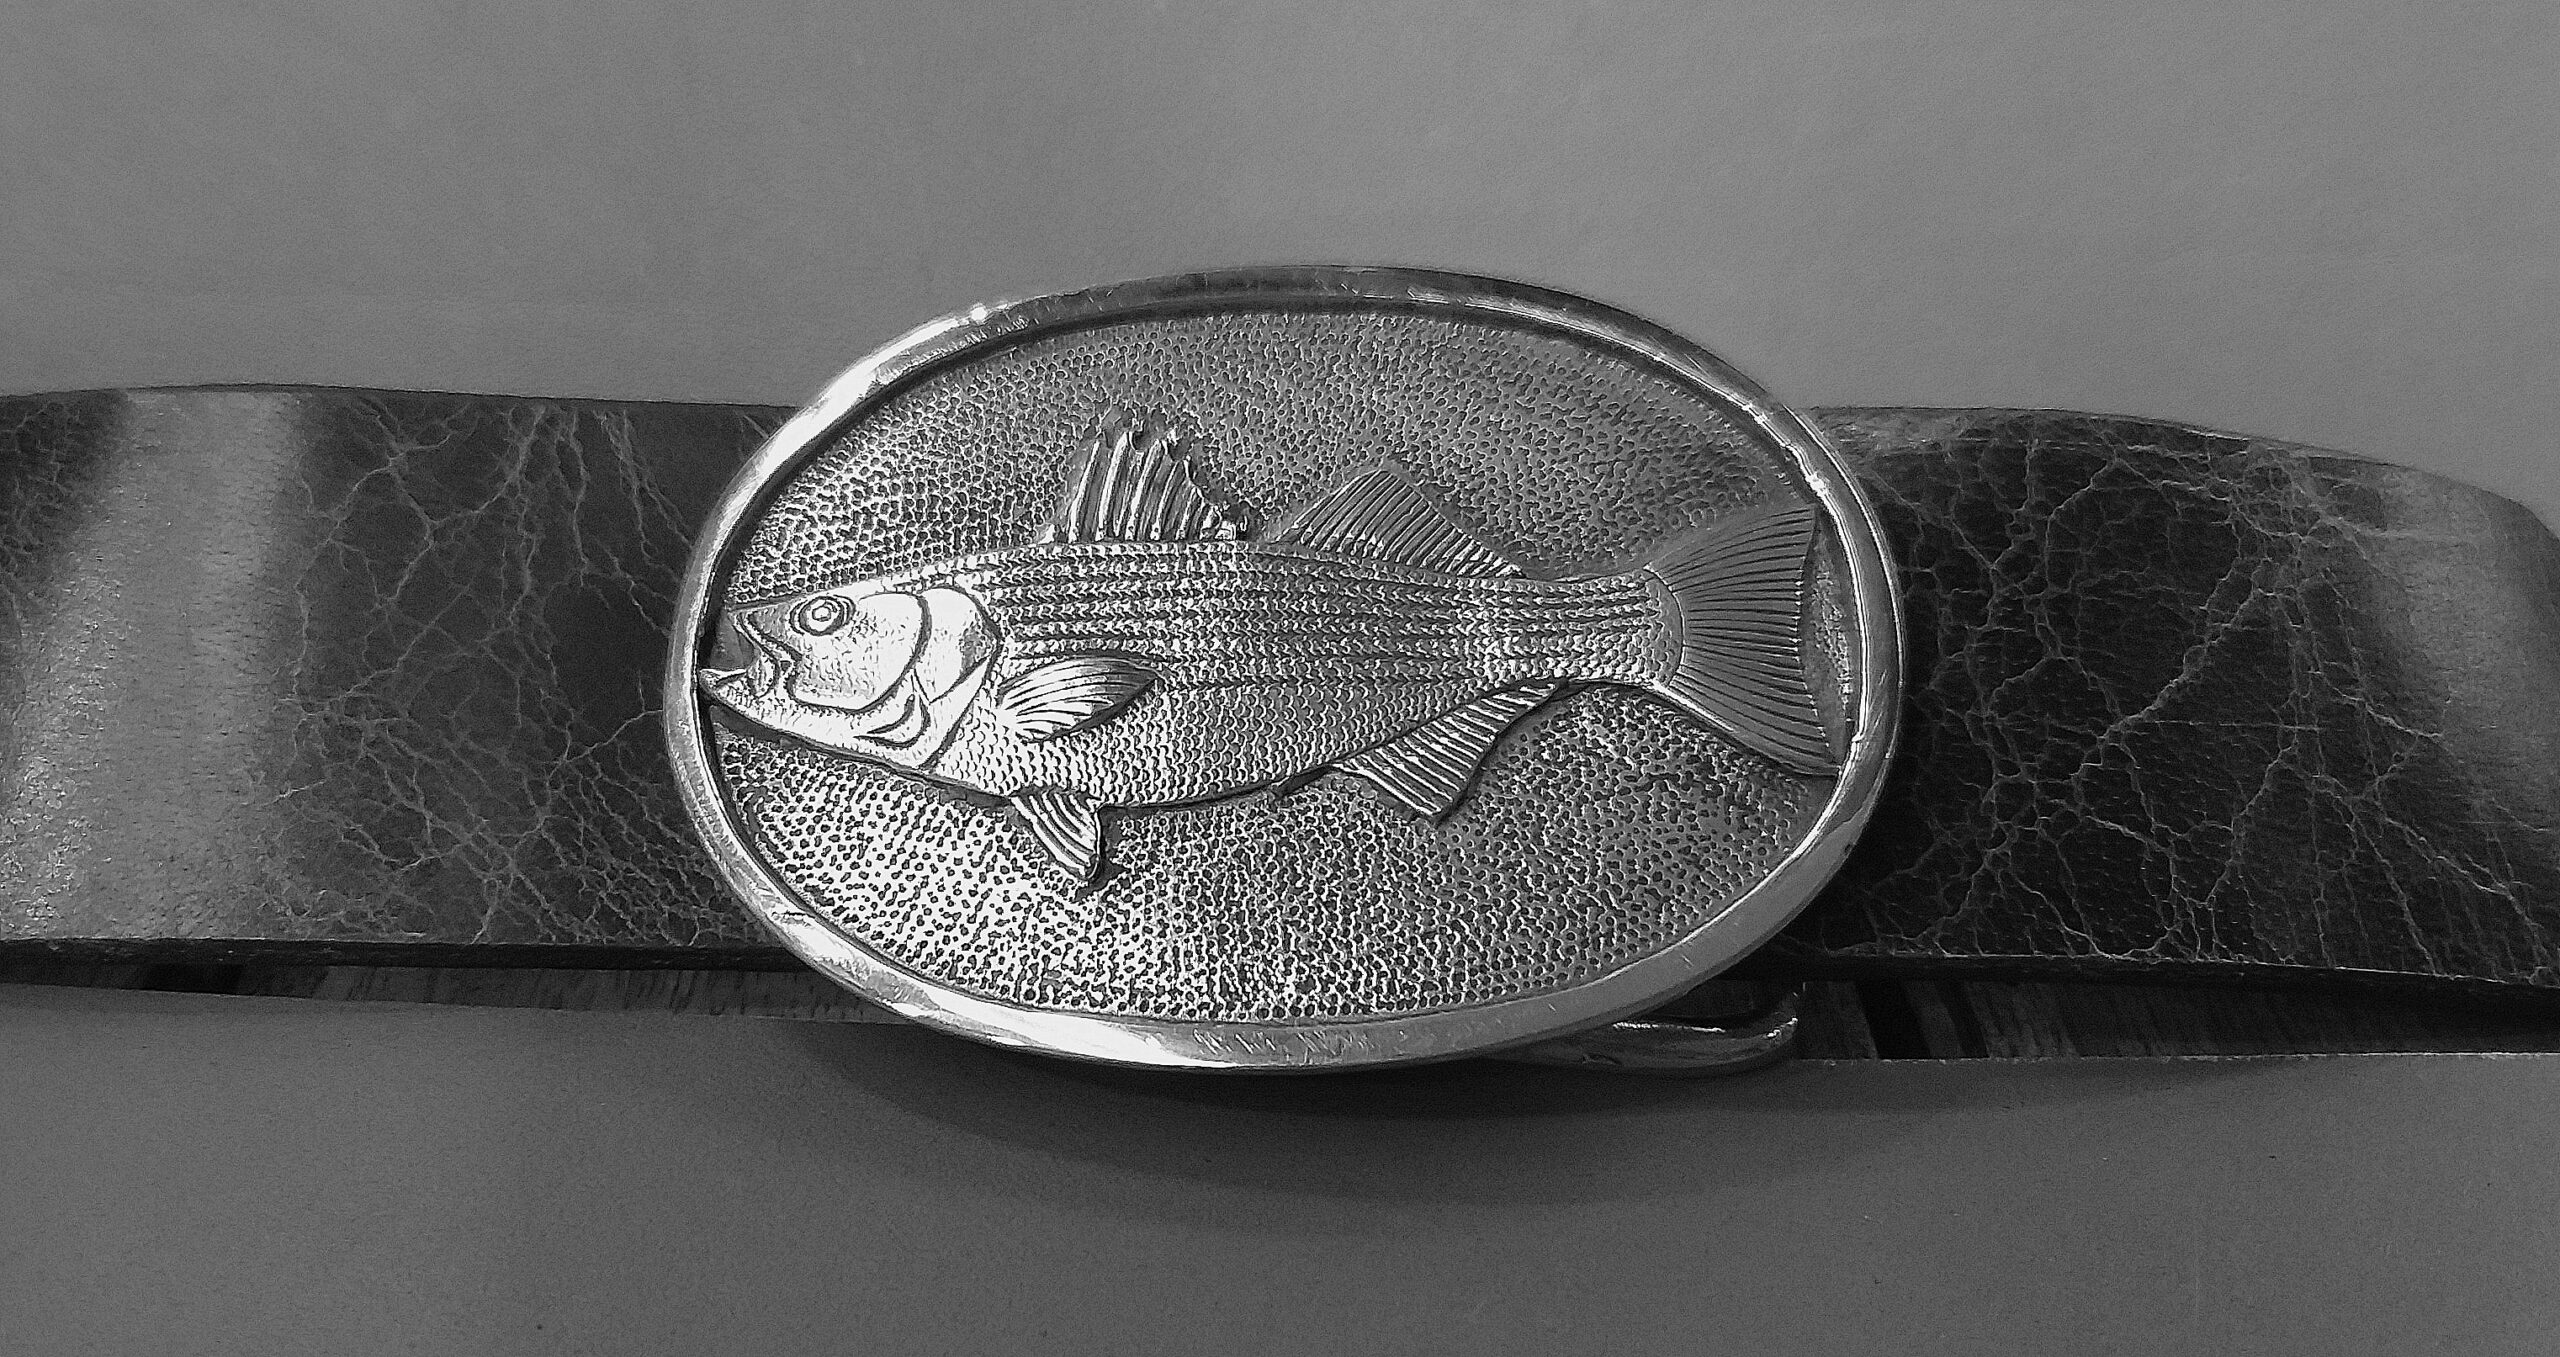 Striped Bass Buckle - Cellar Leather